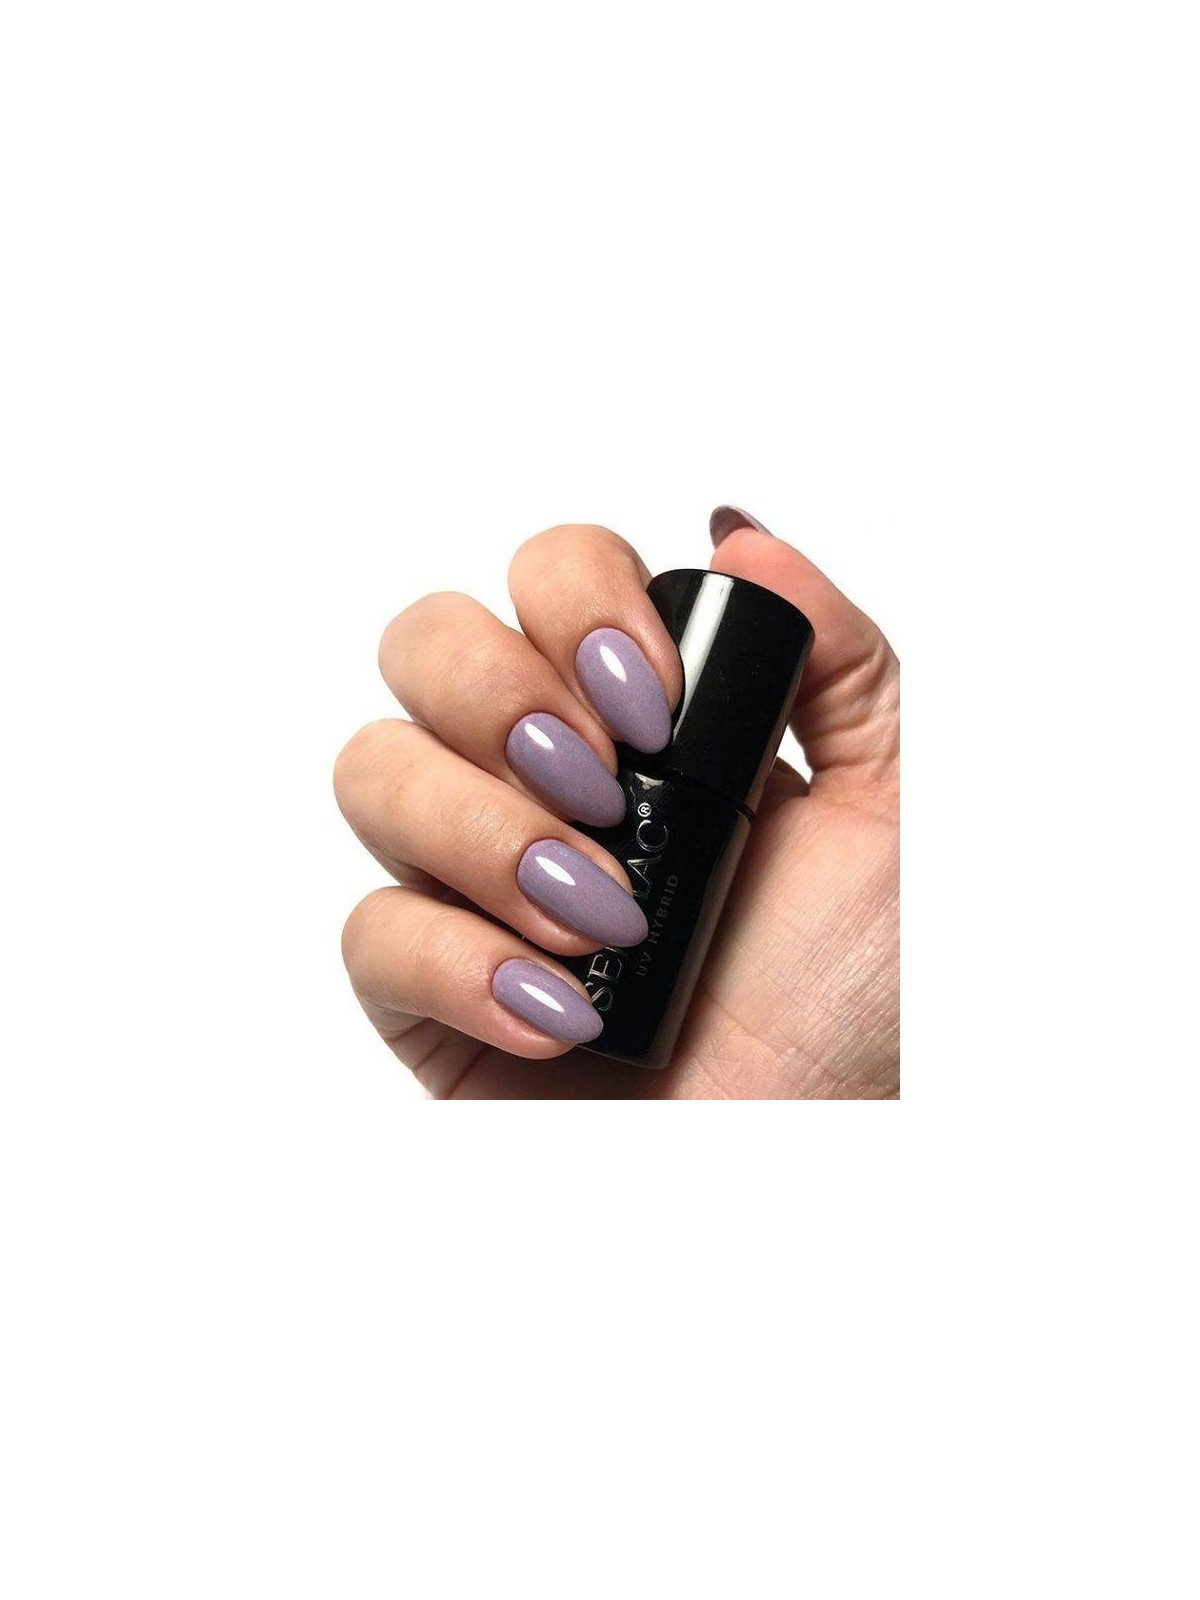 Esmalte Semilac 550 Sweater Weather Stay in Bed 7 ml.